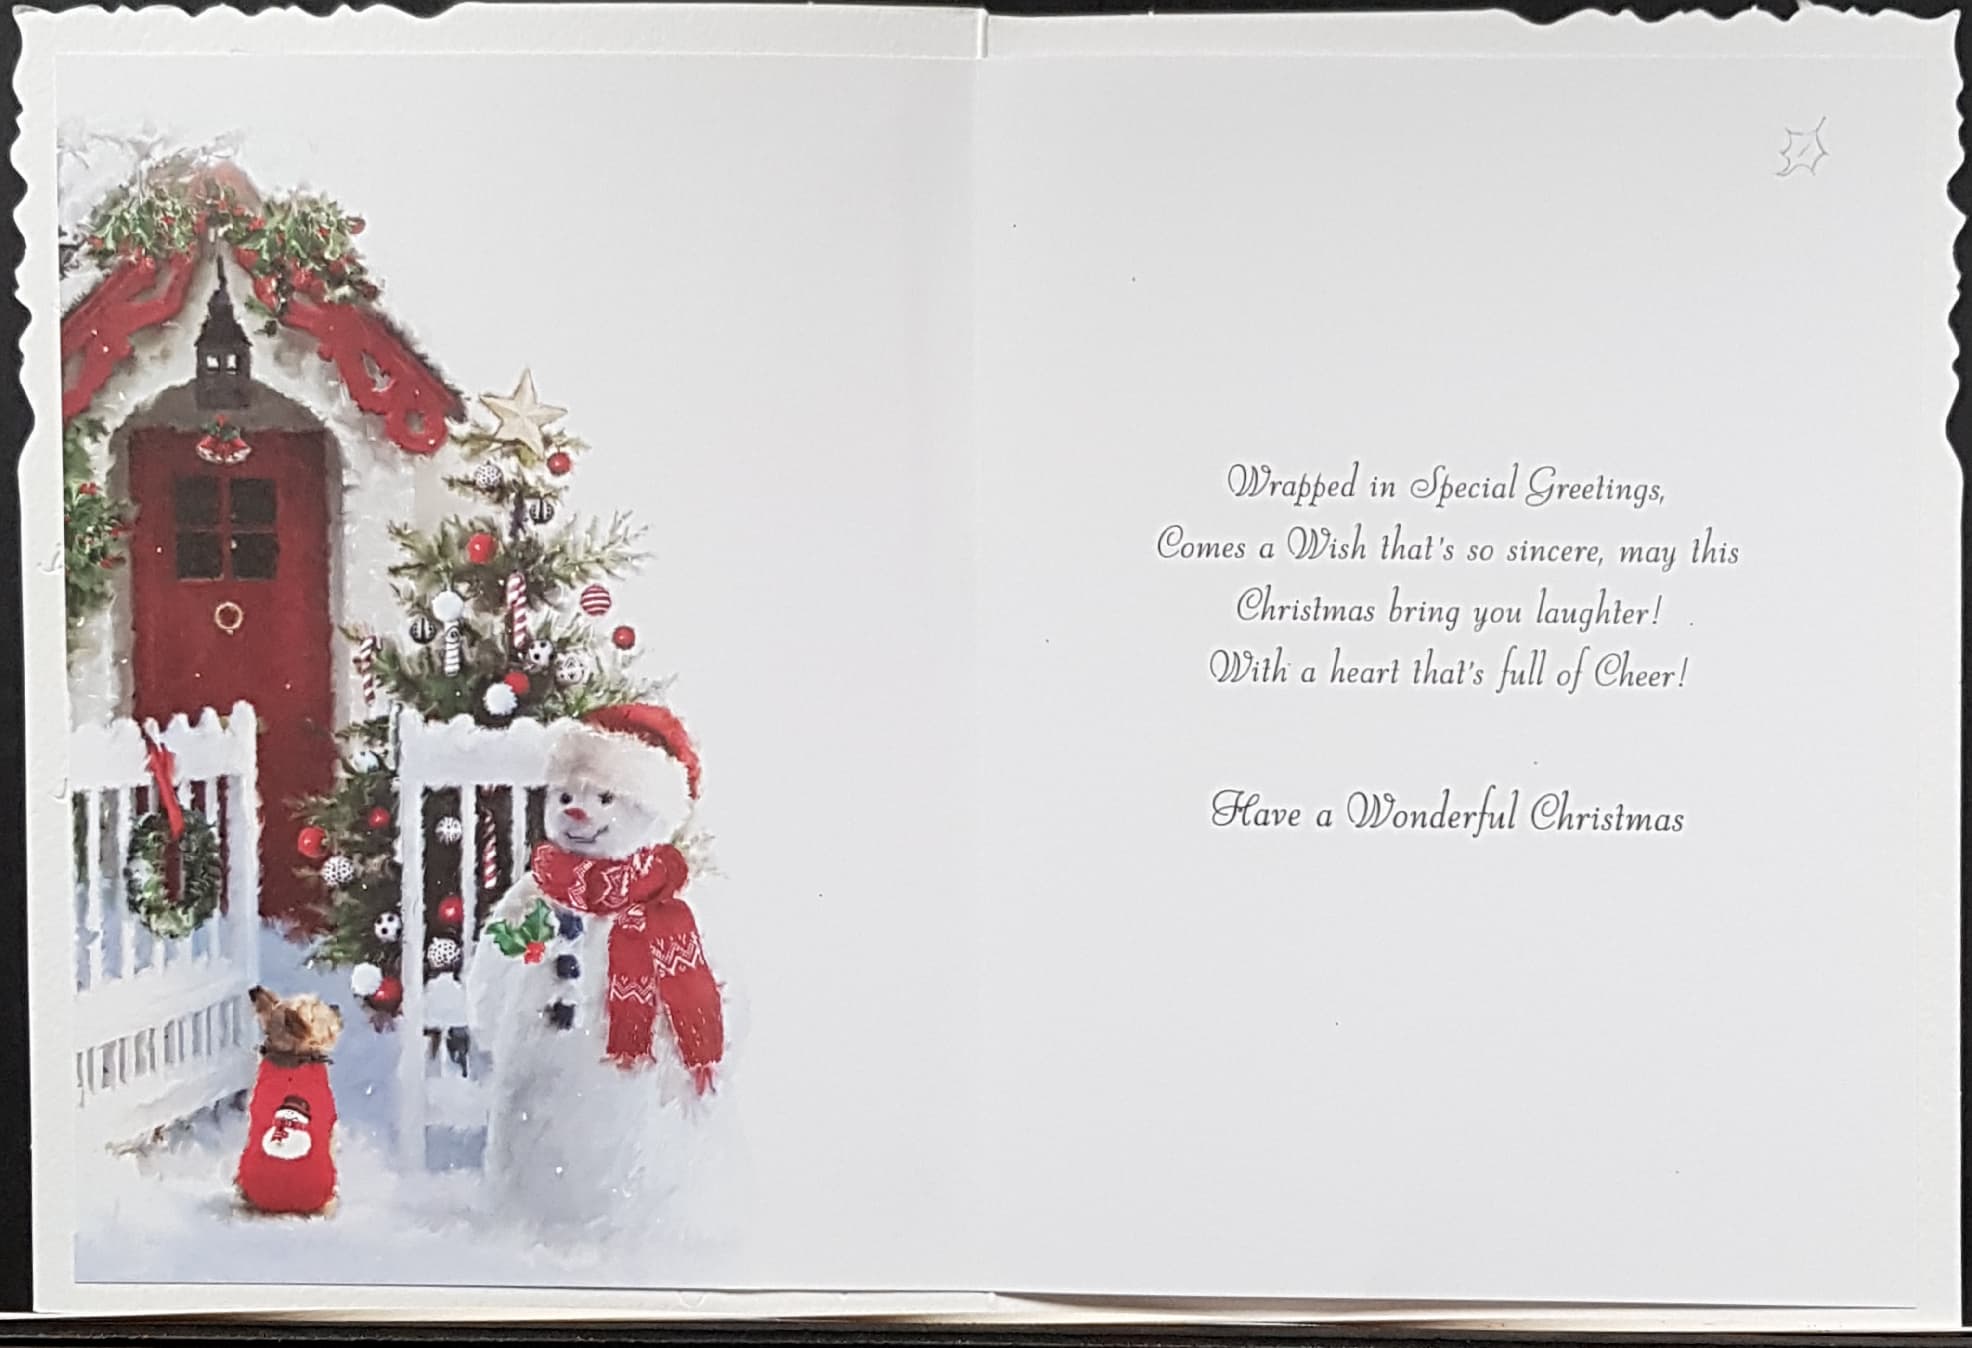 General Christmas Card - Festive Greetings and Wishes & Snowman & Dog Outside House